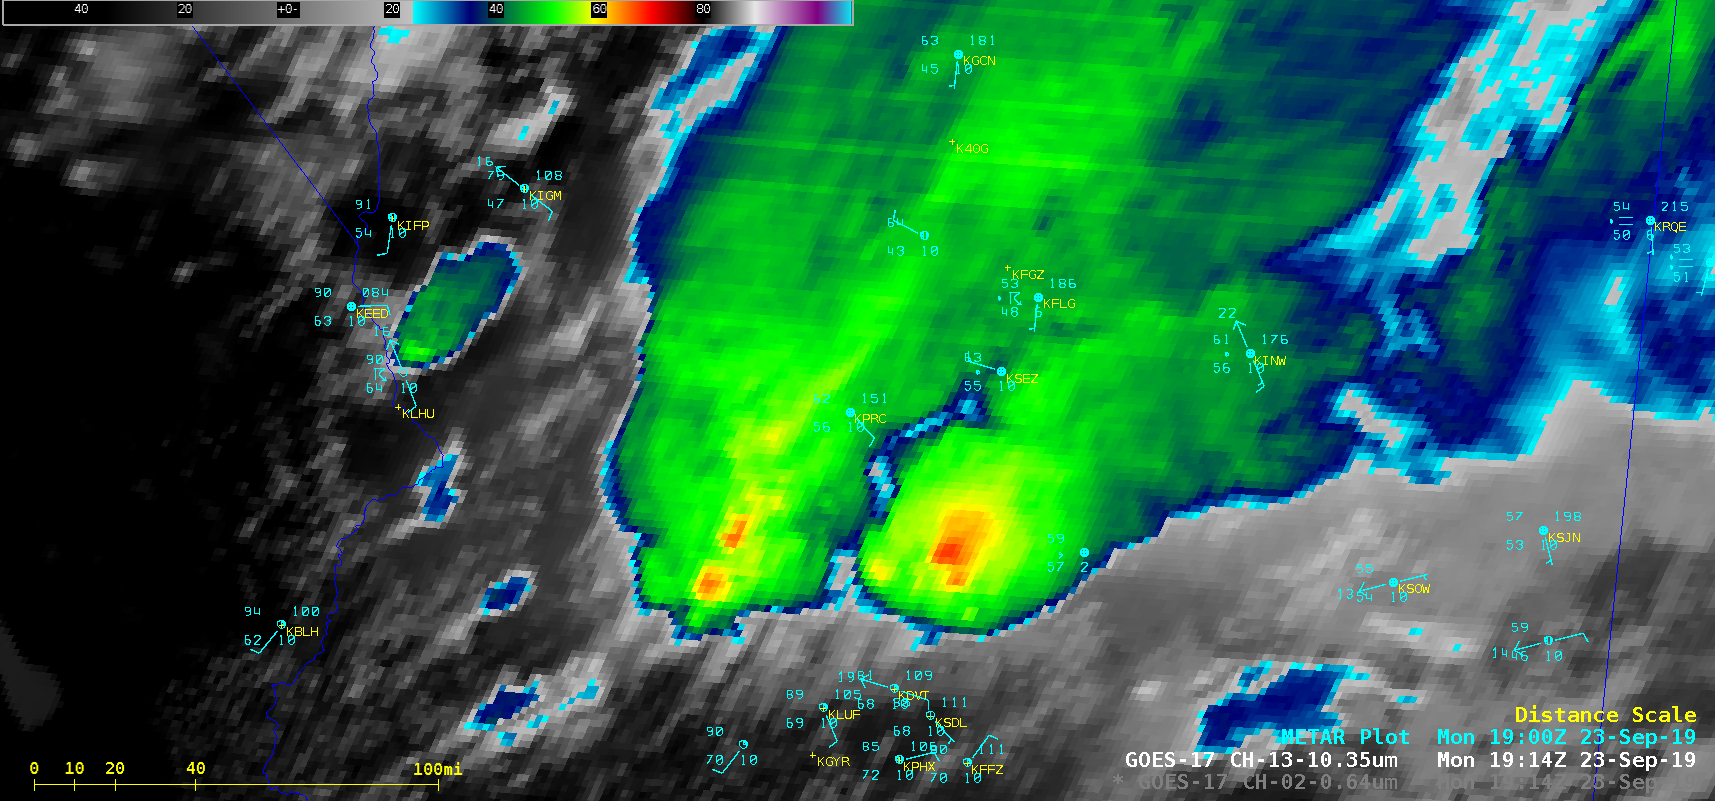 GOES-17 “Clean” Infrared Window (10.35 µm) images, with surface reports plotted in cyan [click to play animation | MP4]